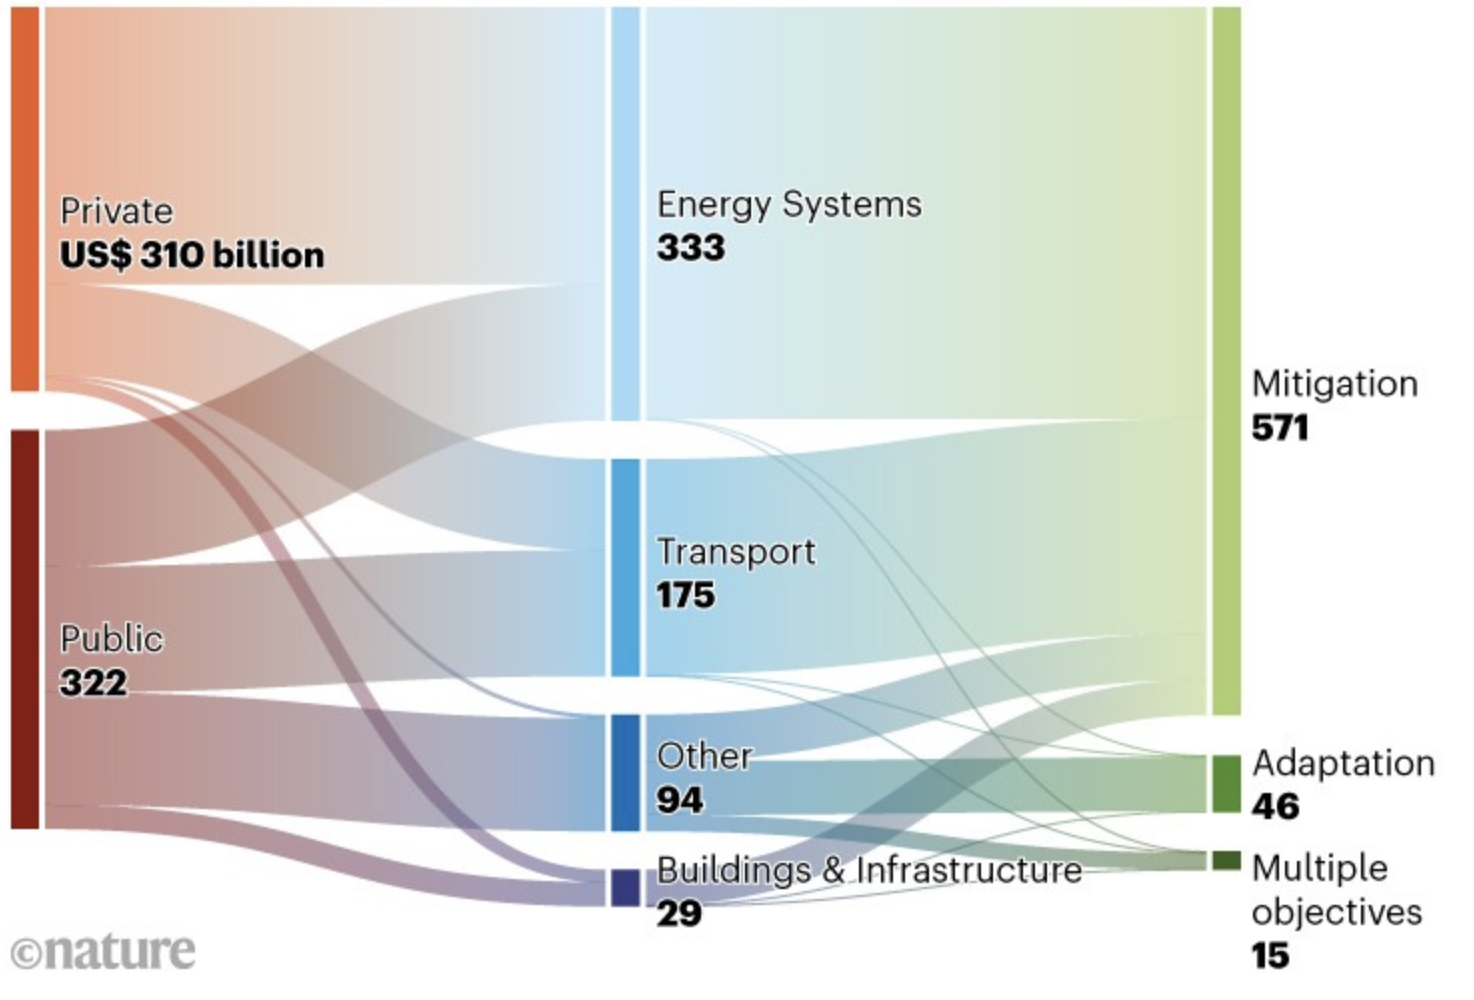 Disparity of adaptation vs. mitigation funding ($46bn out of $571bn)